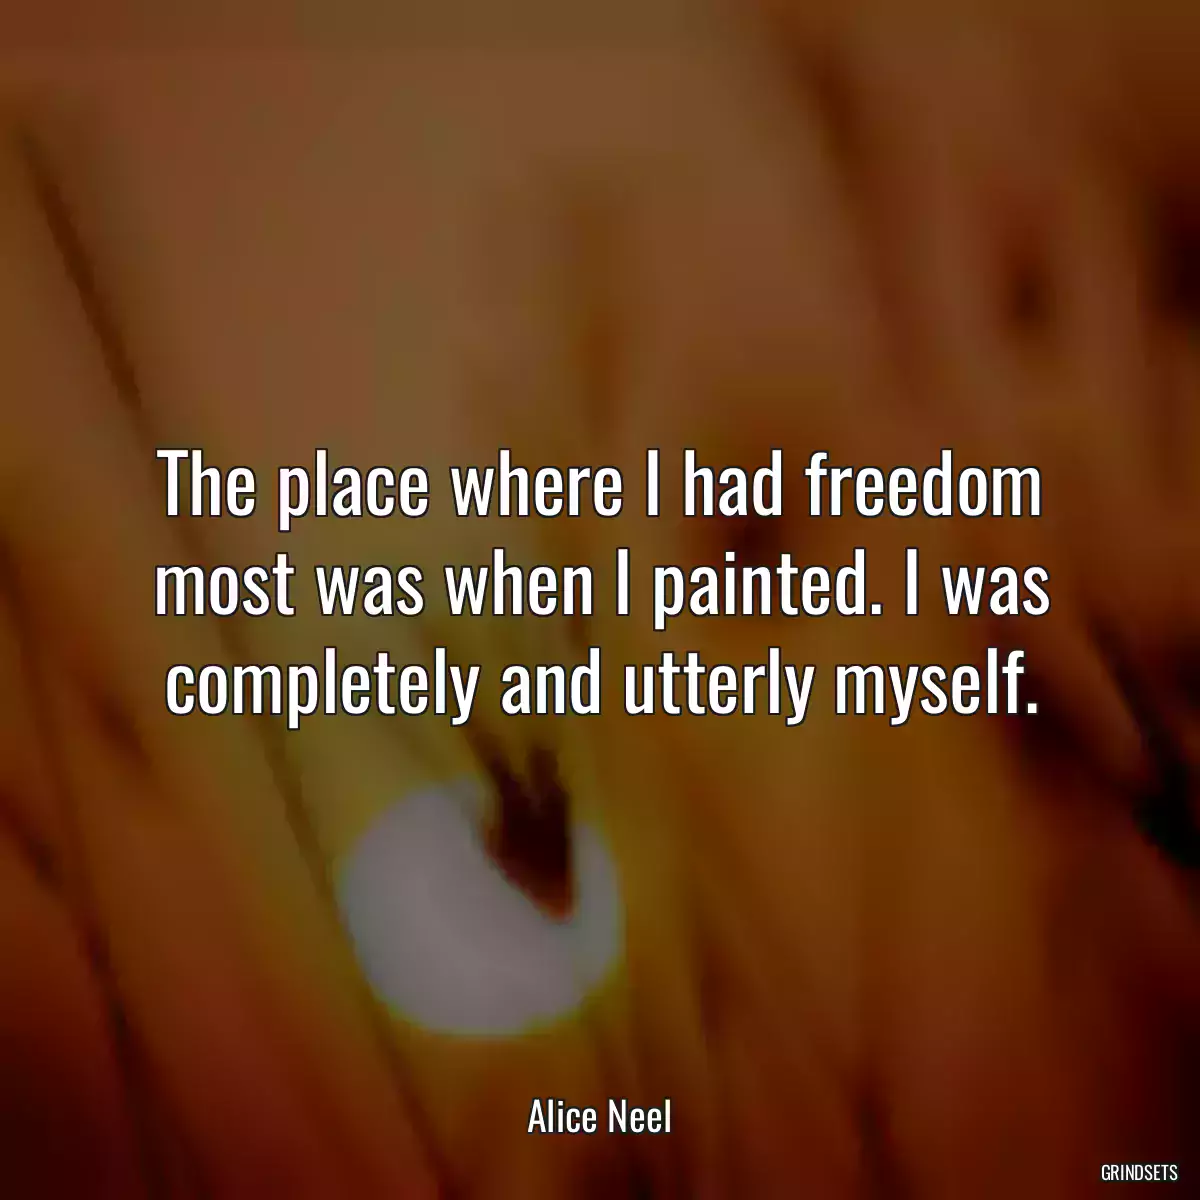 The place where I had freedom most was when I painted. I was completely and utterly myself.